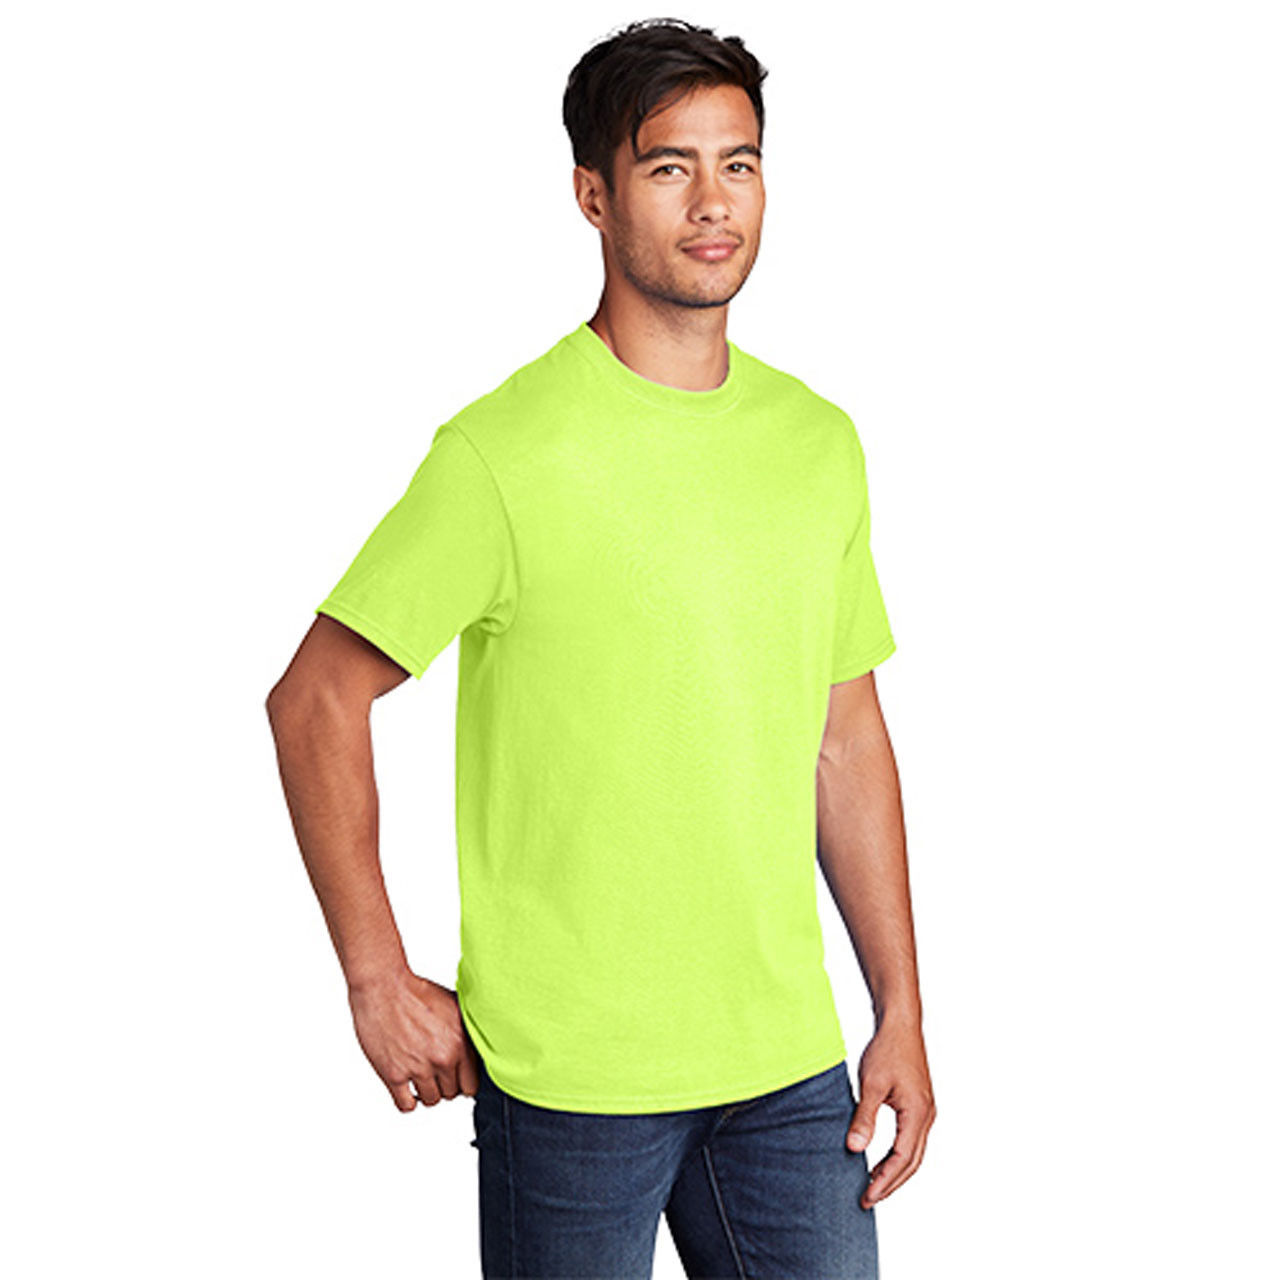 Does the neon color t-shirt have a certain type of neck?